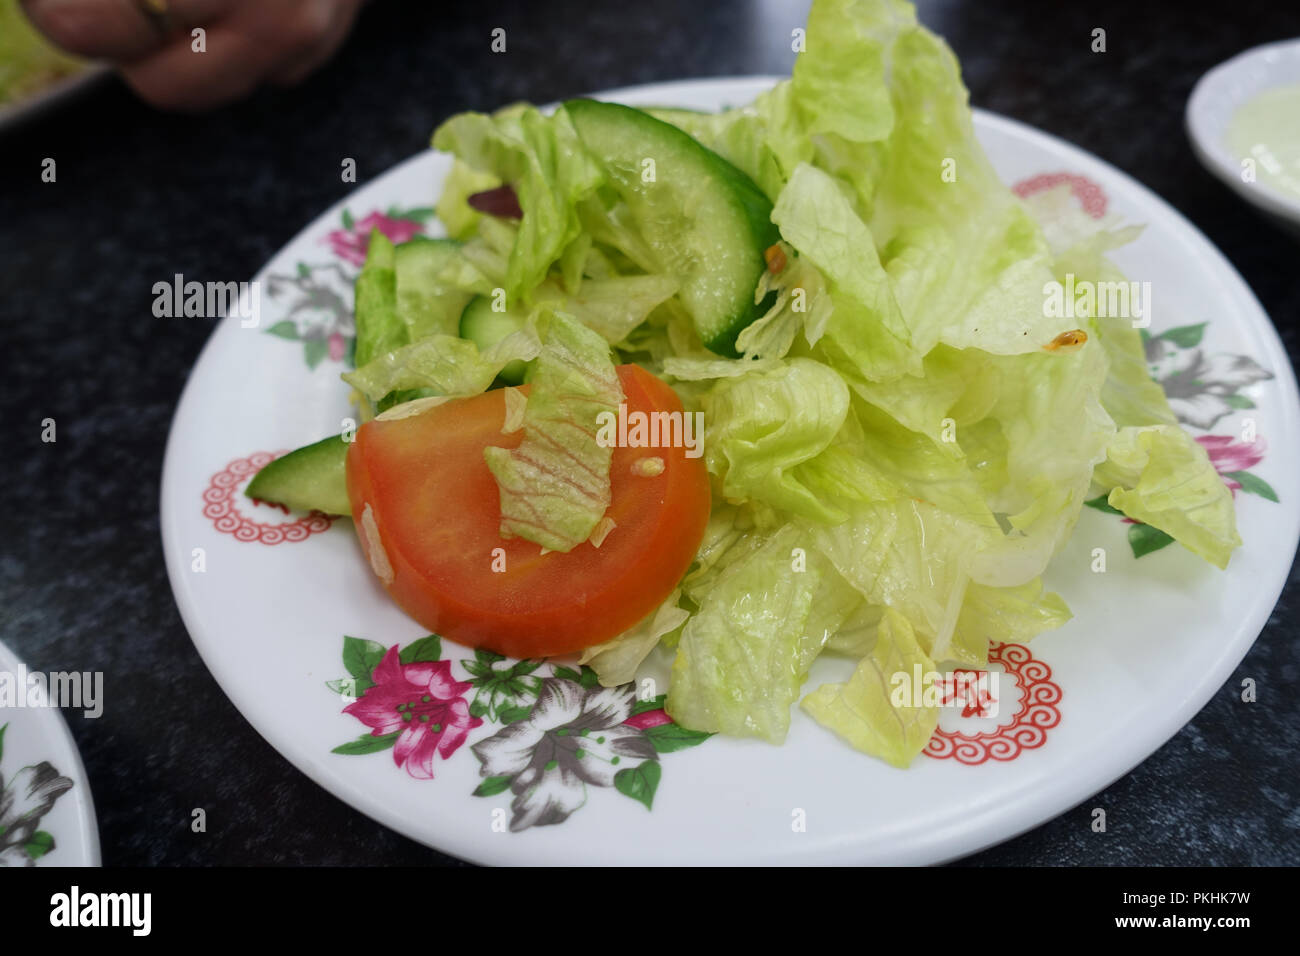 Freshly cut iceberg lettuce, tomato and cucumber on a plate Stock Photo